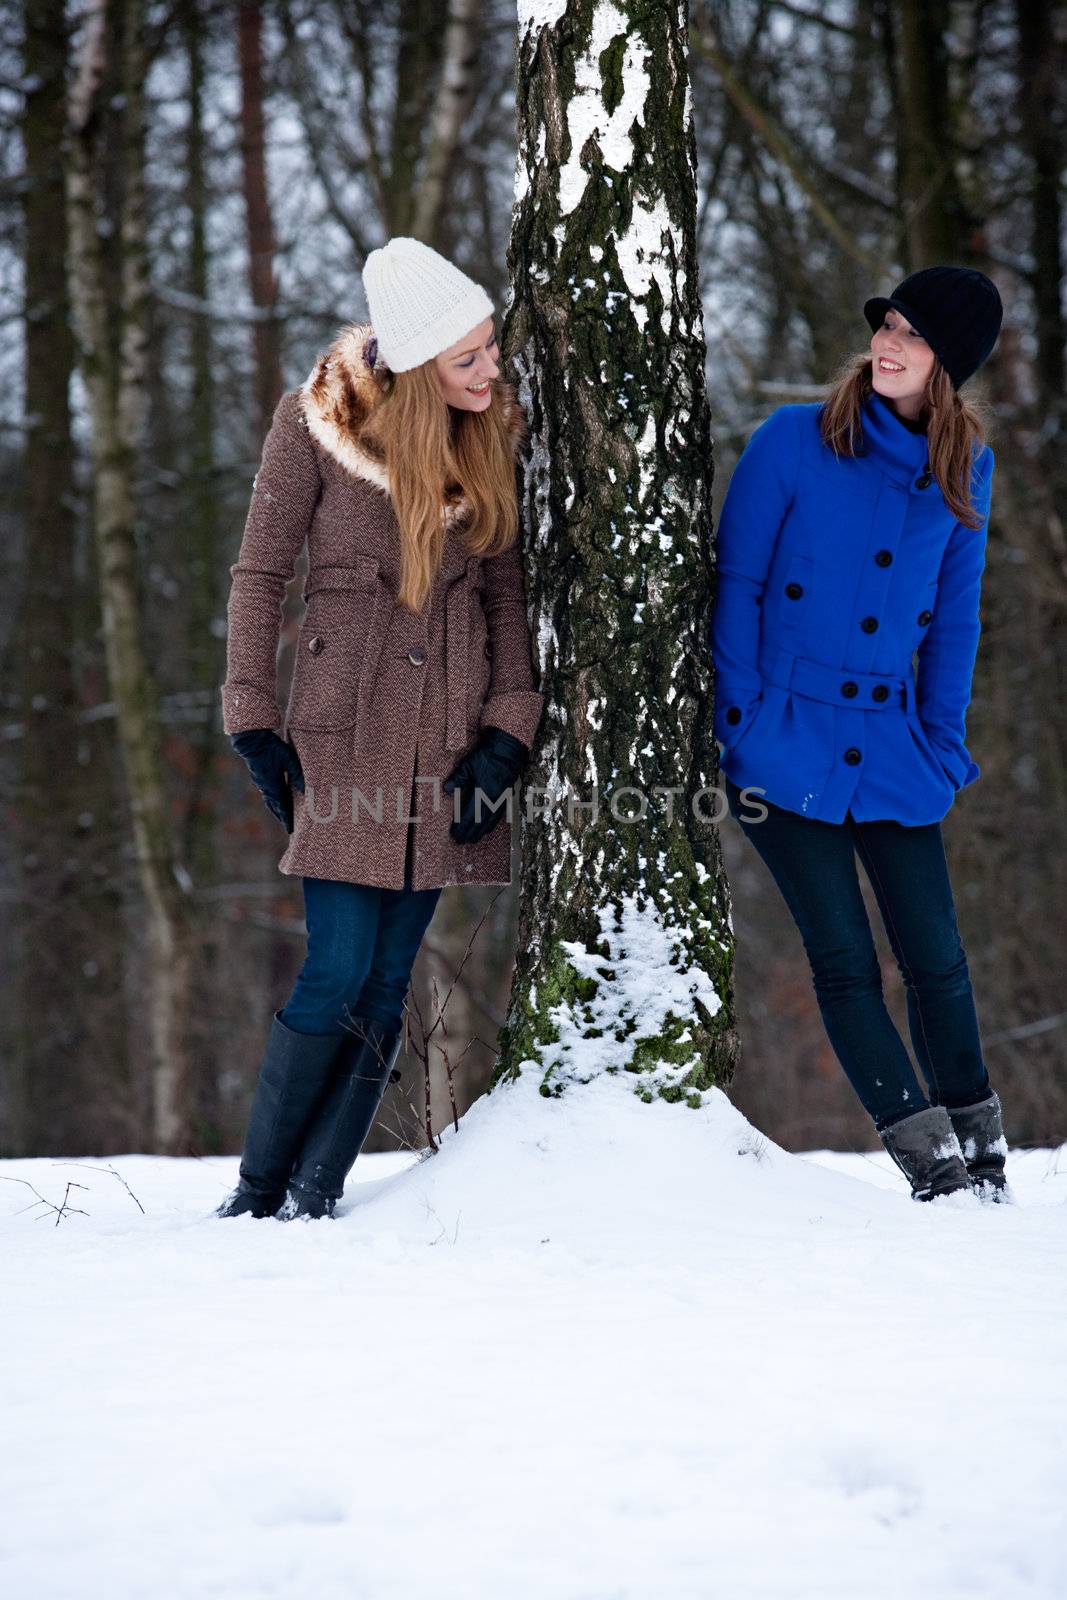 Two sisters standing on each side of a tree in winter